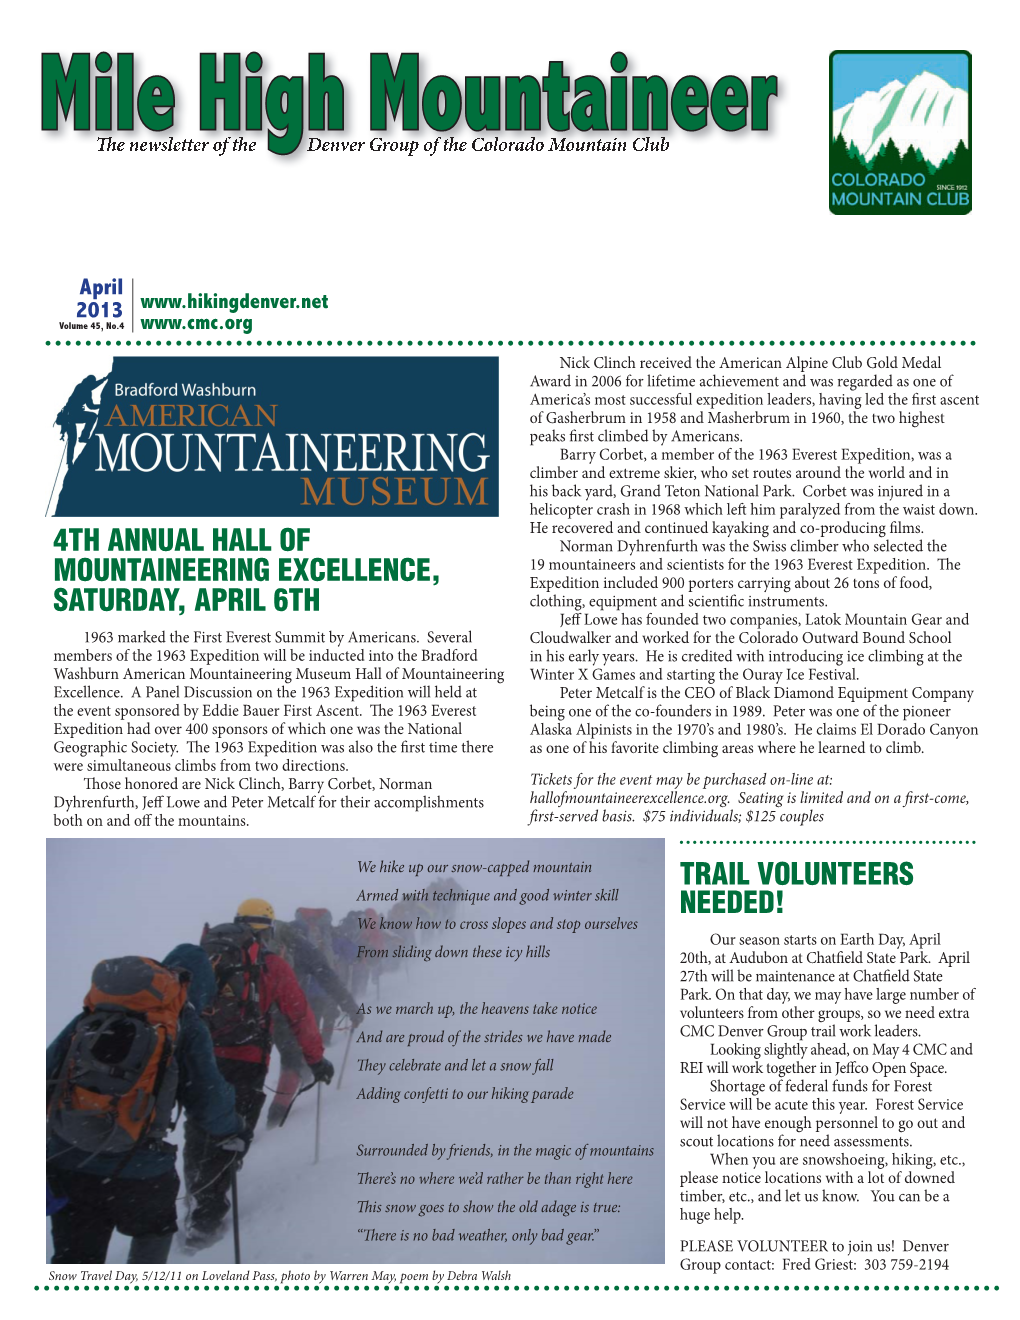 Mile High Mountaineer the Newsletter of the Denver Group of the Colorado Mountain Club